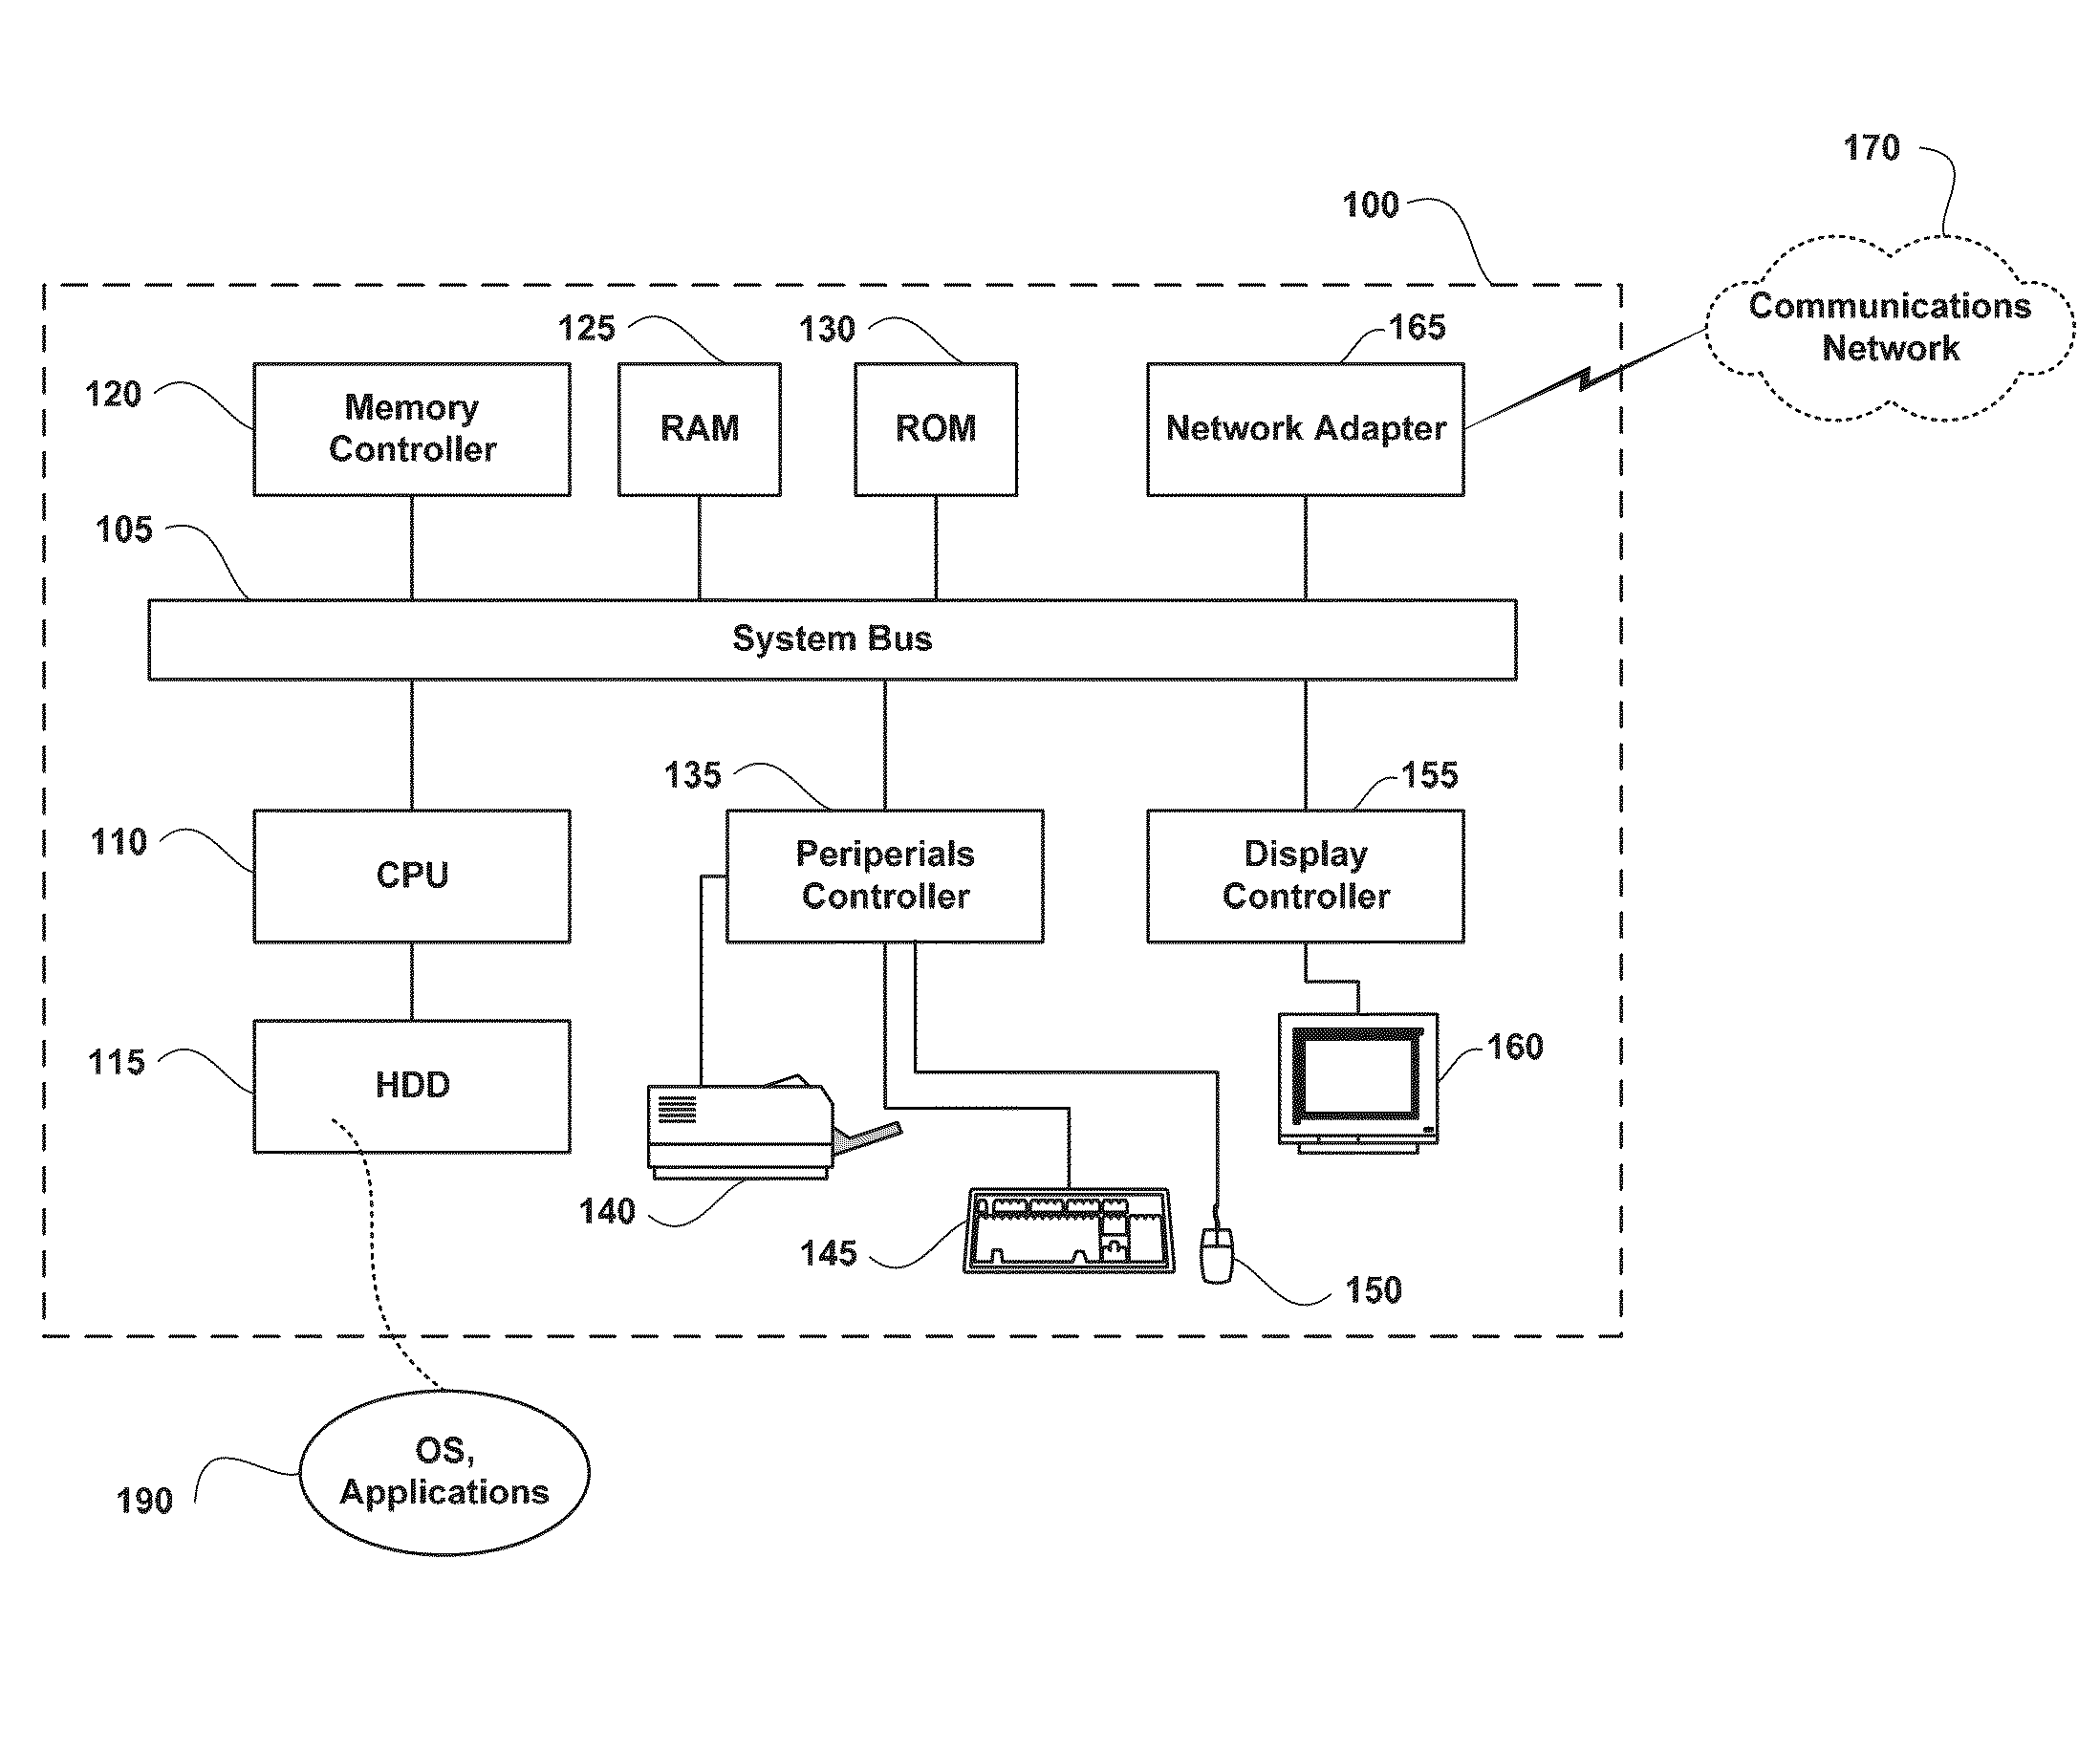 Apparatus, system, and method for obfuscation and de-obfuscation of digital content